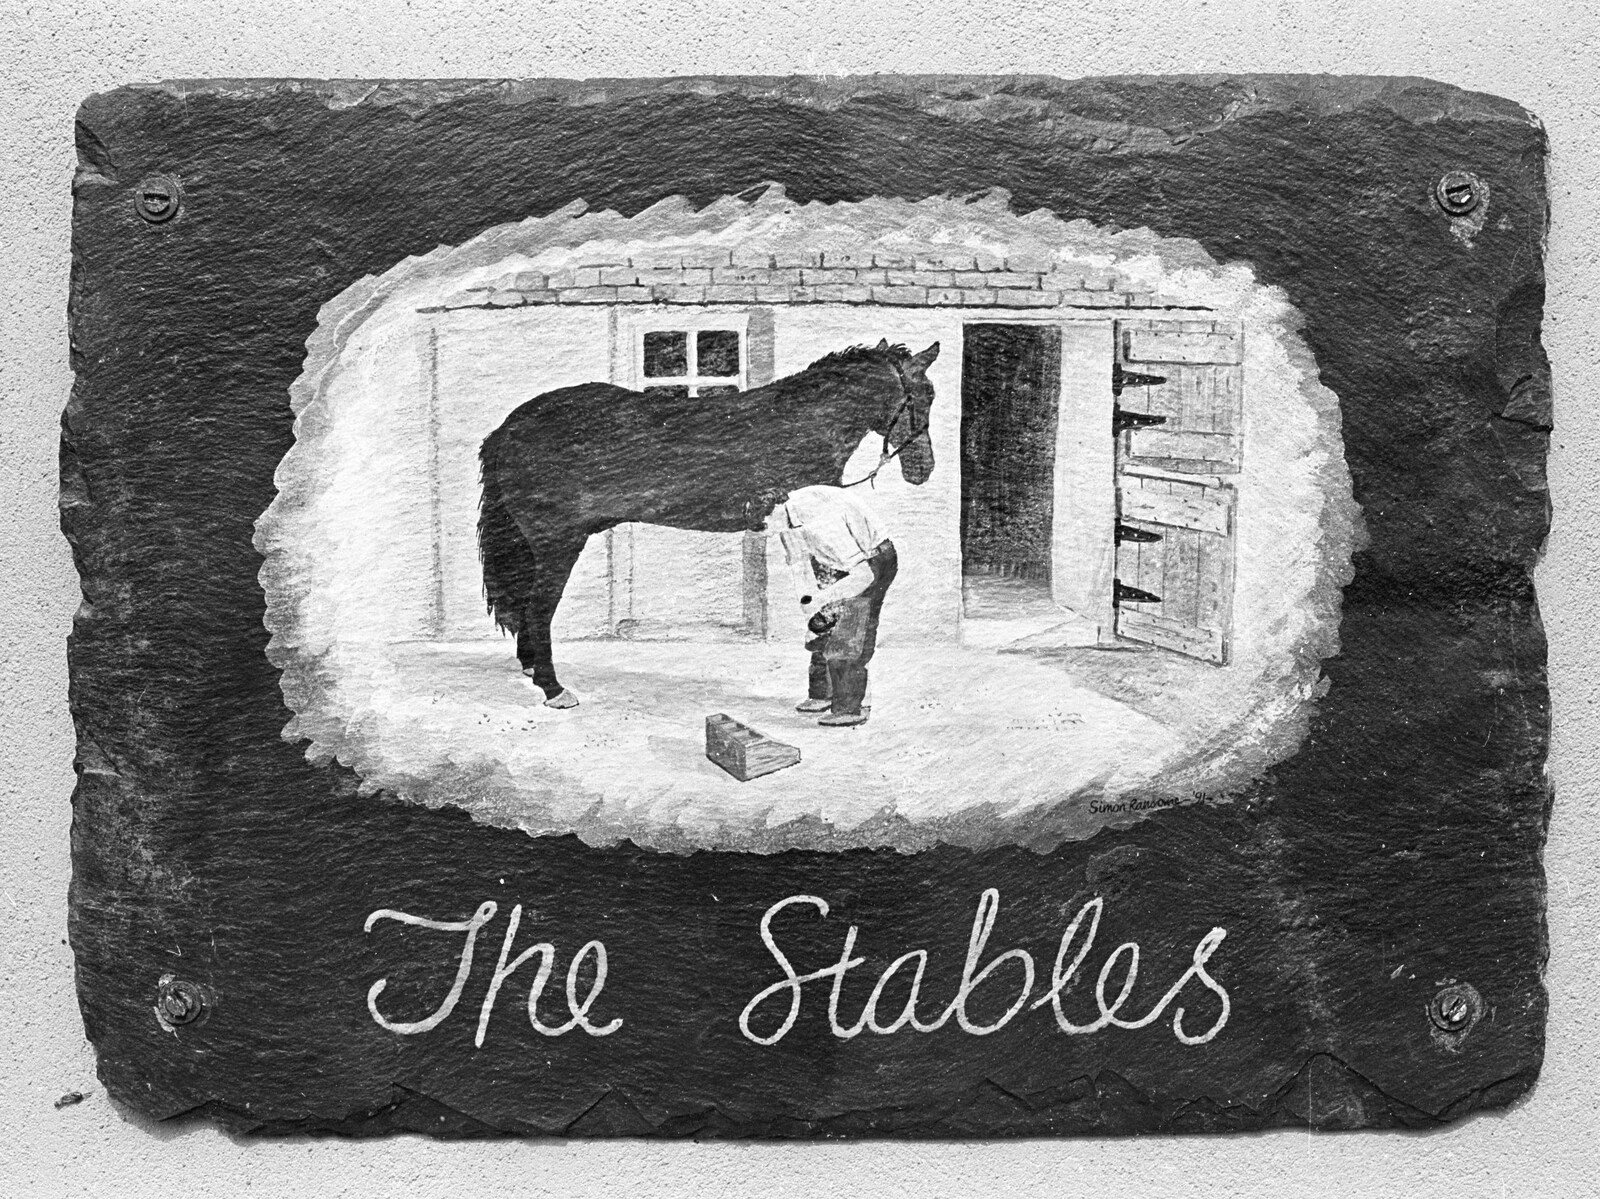 A Black and White Life in Concrete, Stuston, Suffolk - 3rd September 1992: A Nosher-painted slate for The Stables - the Stuston pad